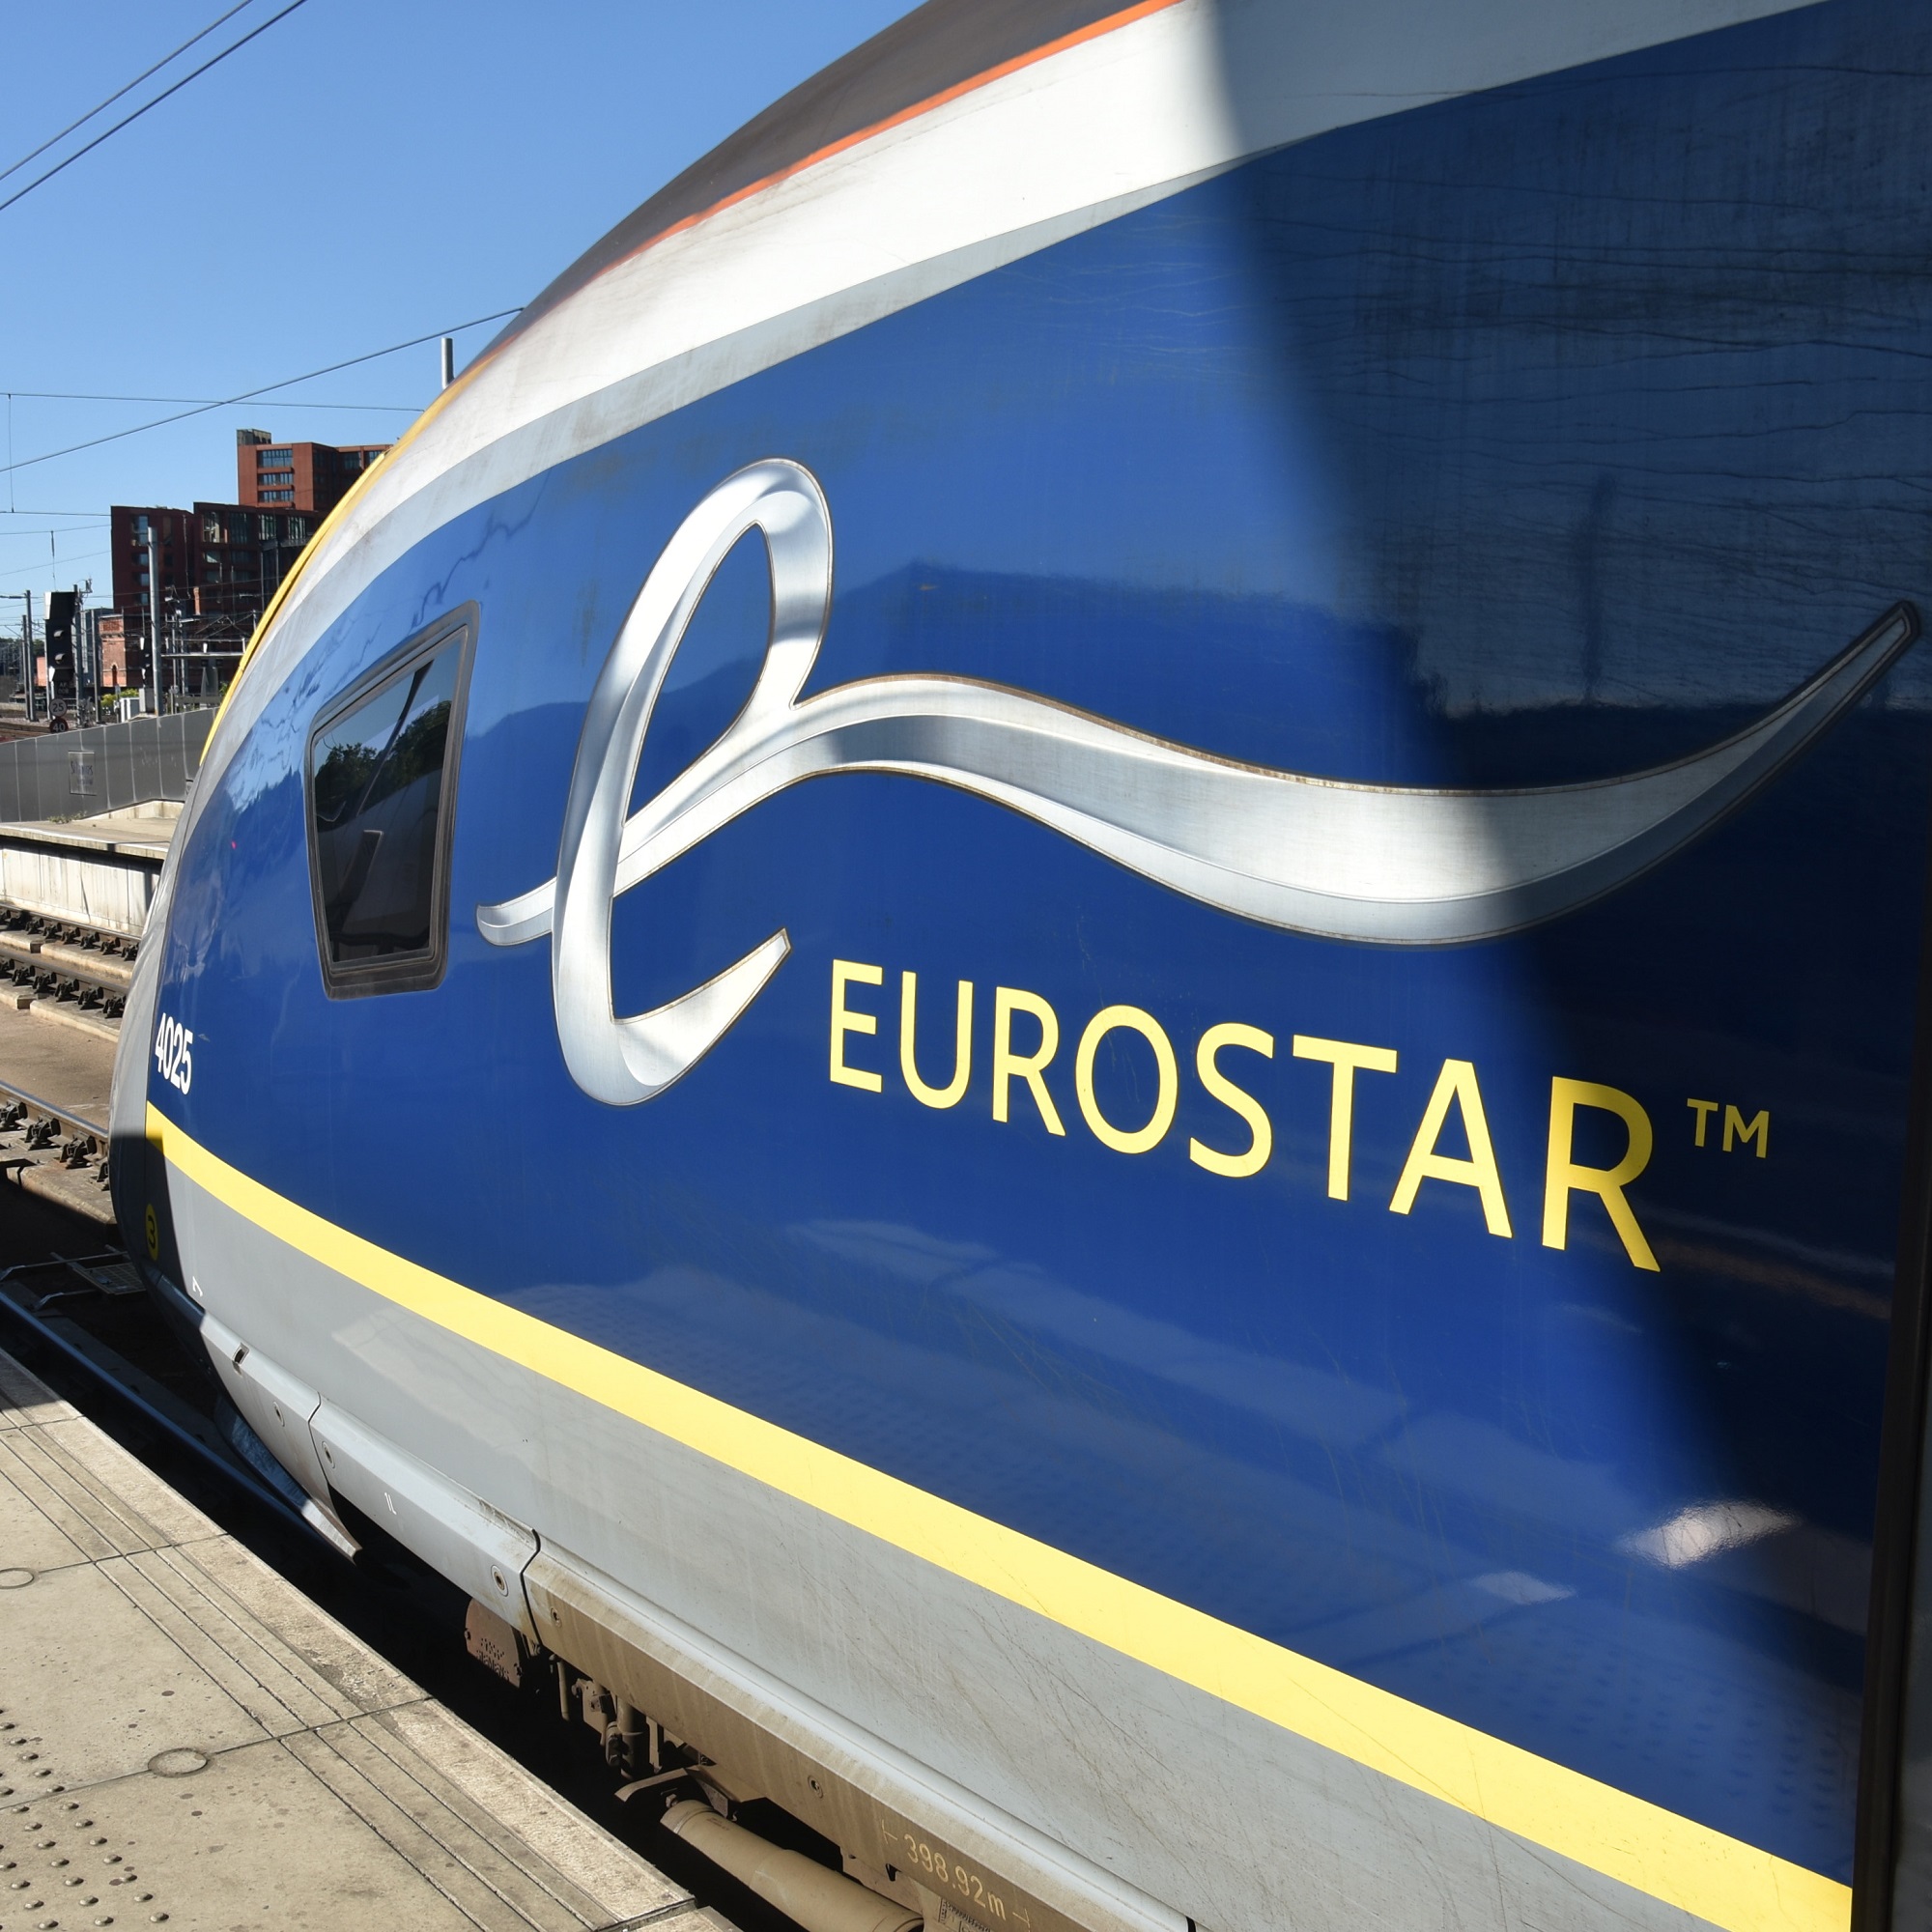 Eurostar e320 No. 4025 sitting at the sunny end of the platform of St Pancras International in June 2018, waiting to take me to Amsterdam.